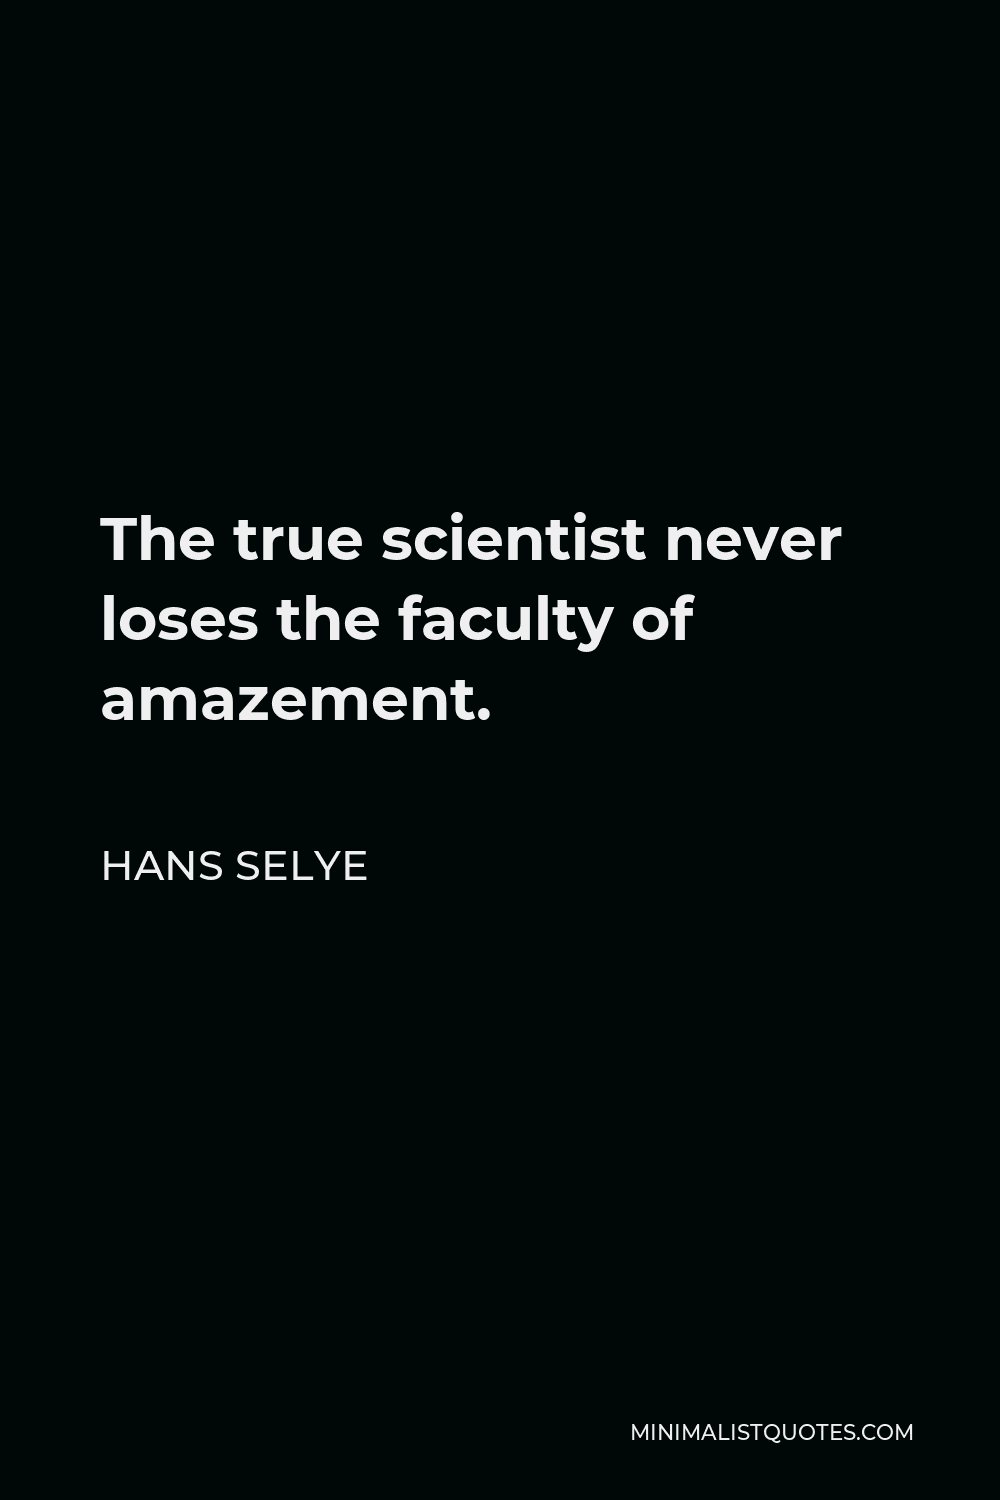 Hans Selye Quote - The true scientist never loses the faculty of amazement.